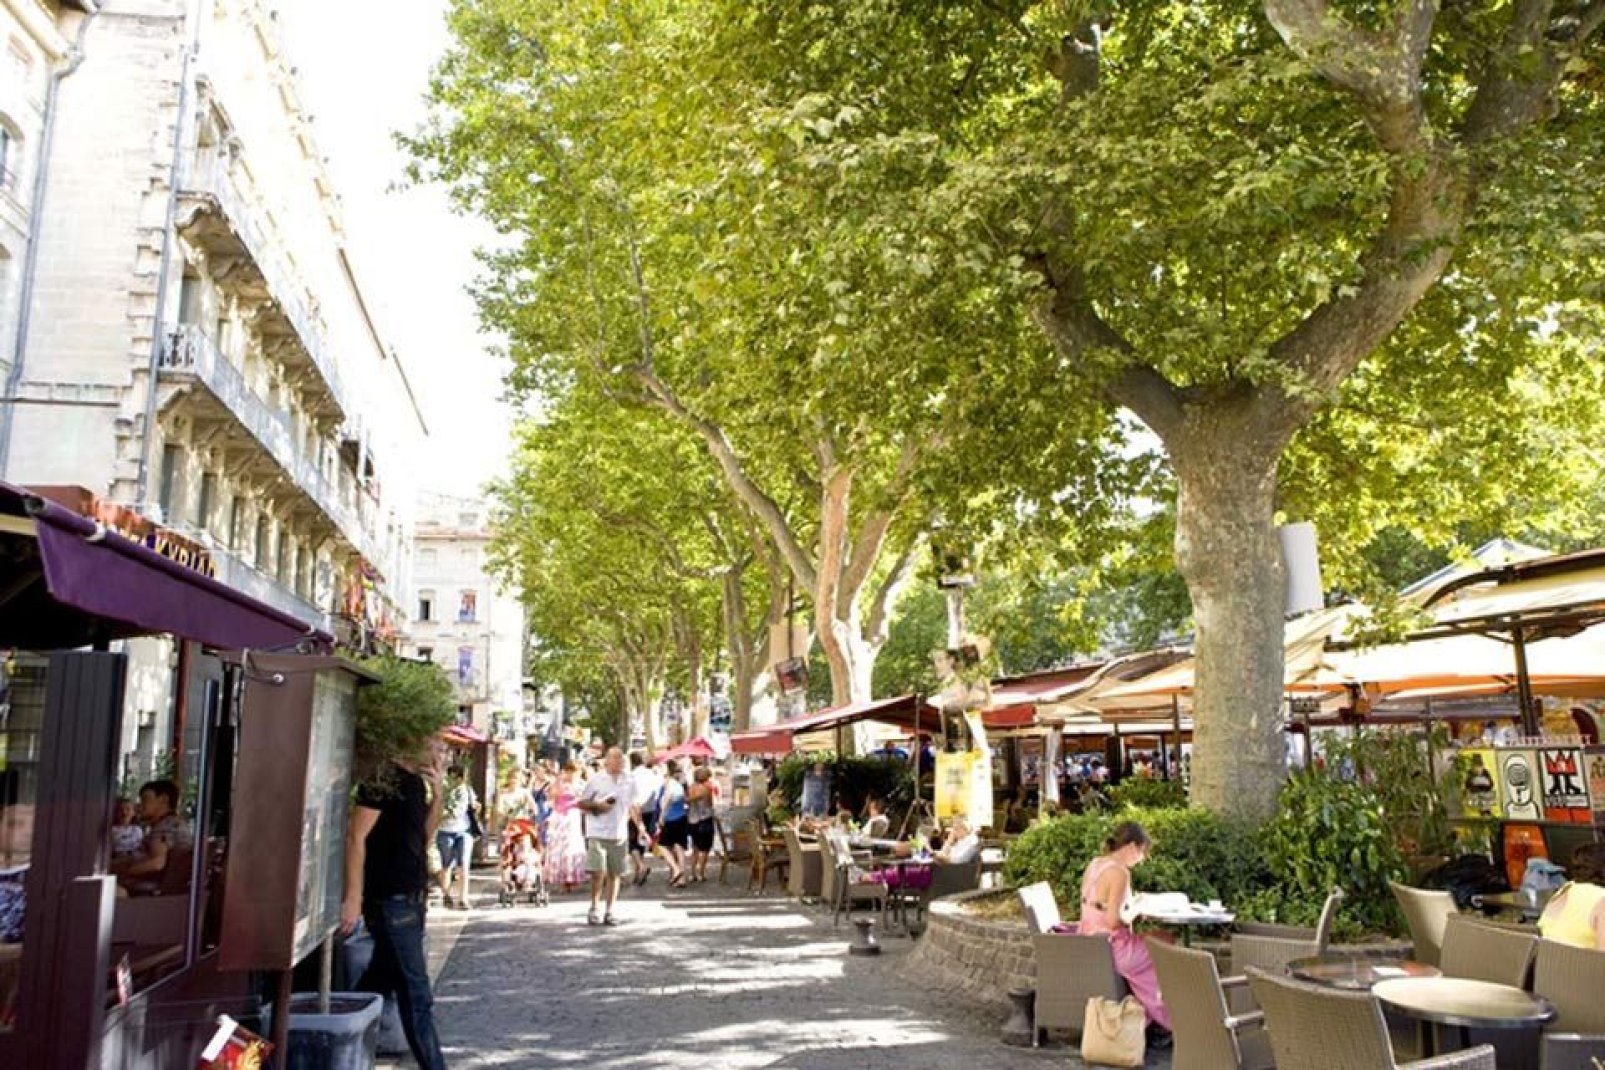 Renowned for its quality of life, the city boasts some 200 areas of parkland, which helped it win first prize in the Ville Fleurie ('City in Bloom') competition.